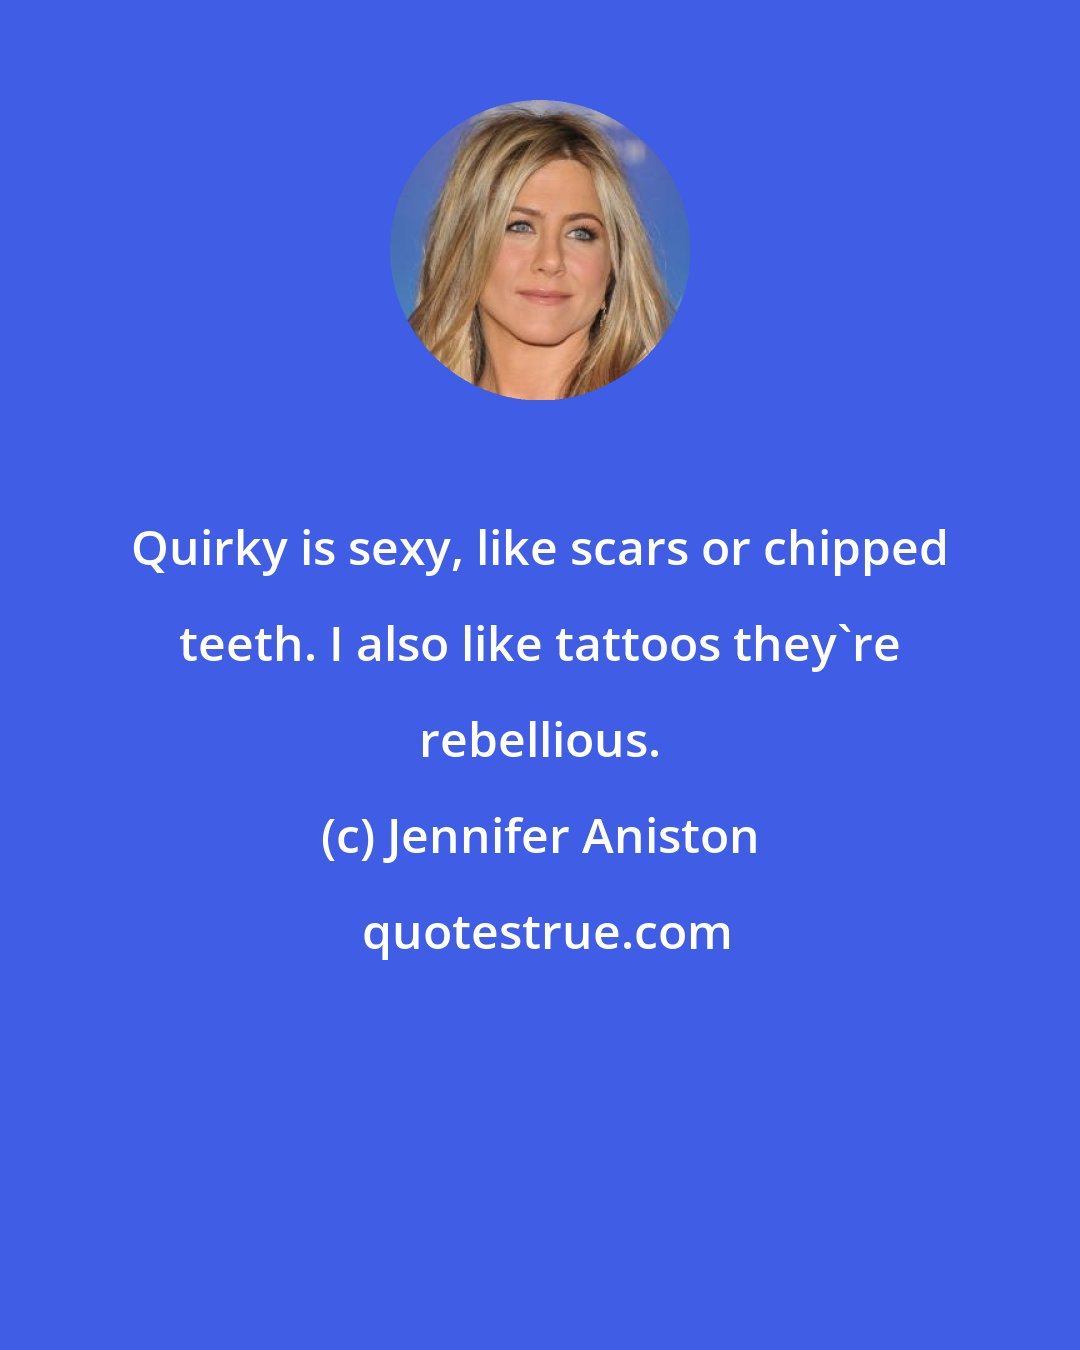 Jennifer Aniston: Quirky is sexy, like scars or chipped teeth. I also like tattoos they're rebellious.